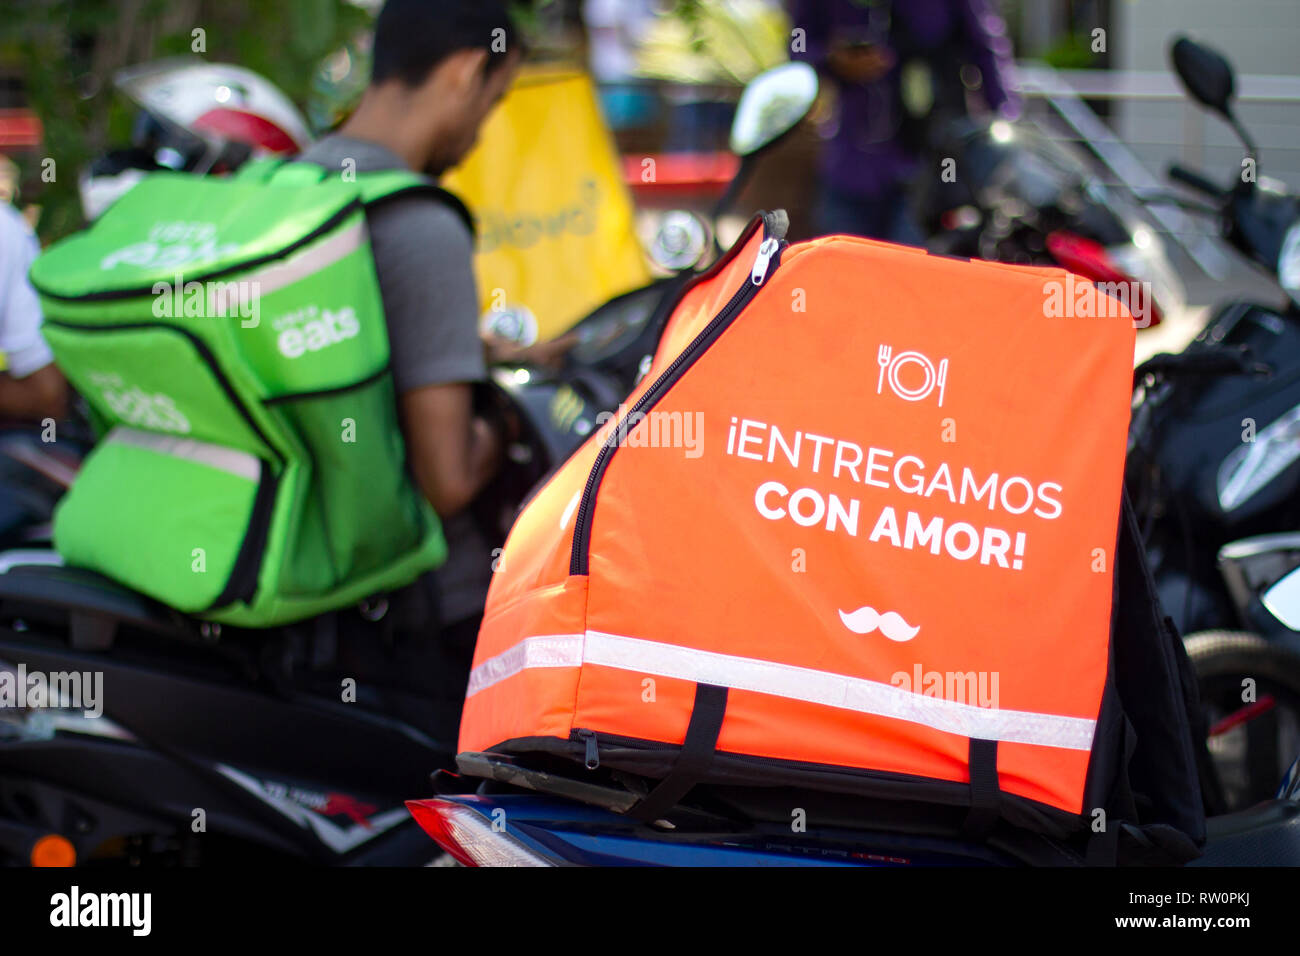 Lima, Peru - March 3 2019: Rappi, Uber eats and Glovo boxes in motorbikes. Competing brands for food delivery service. Sharing collaborative economy c Stock Photo